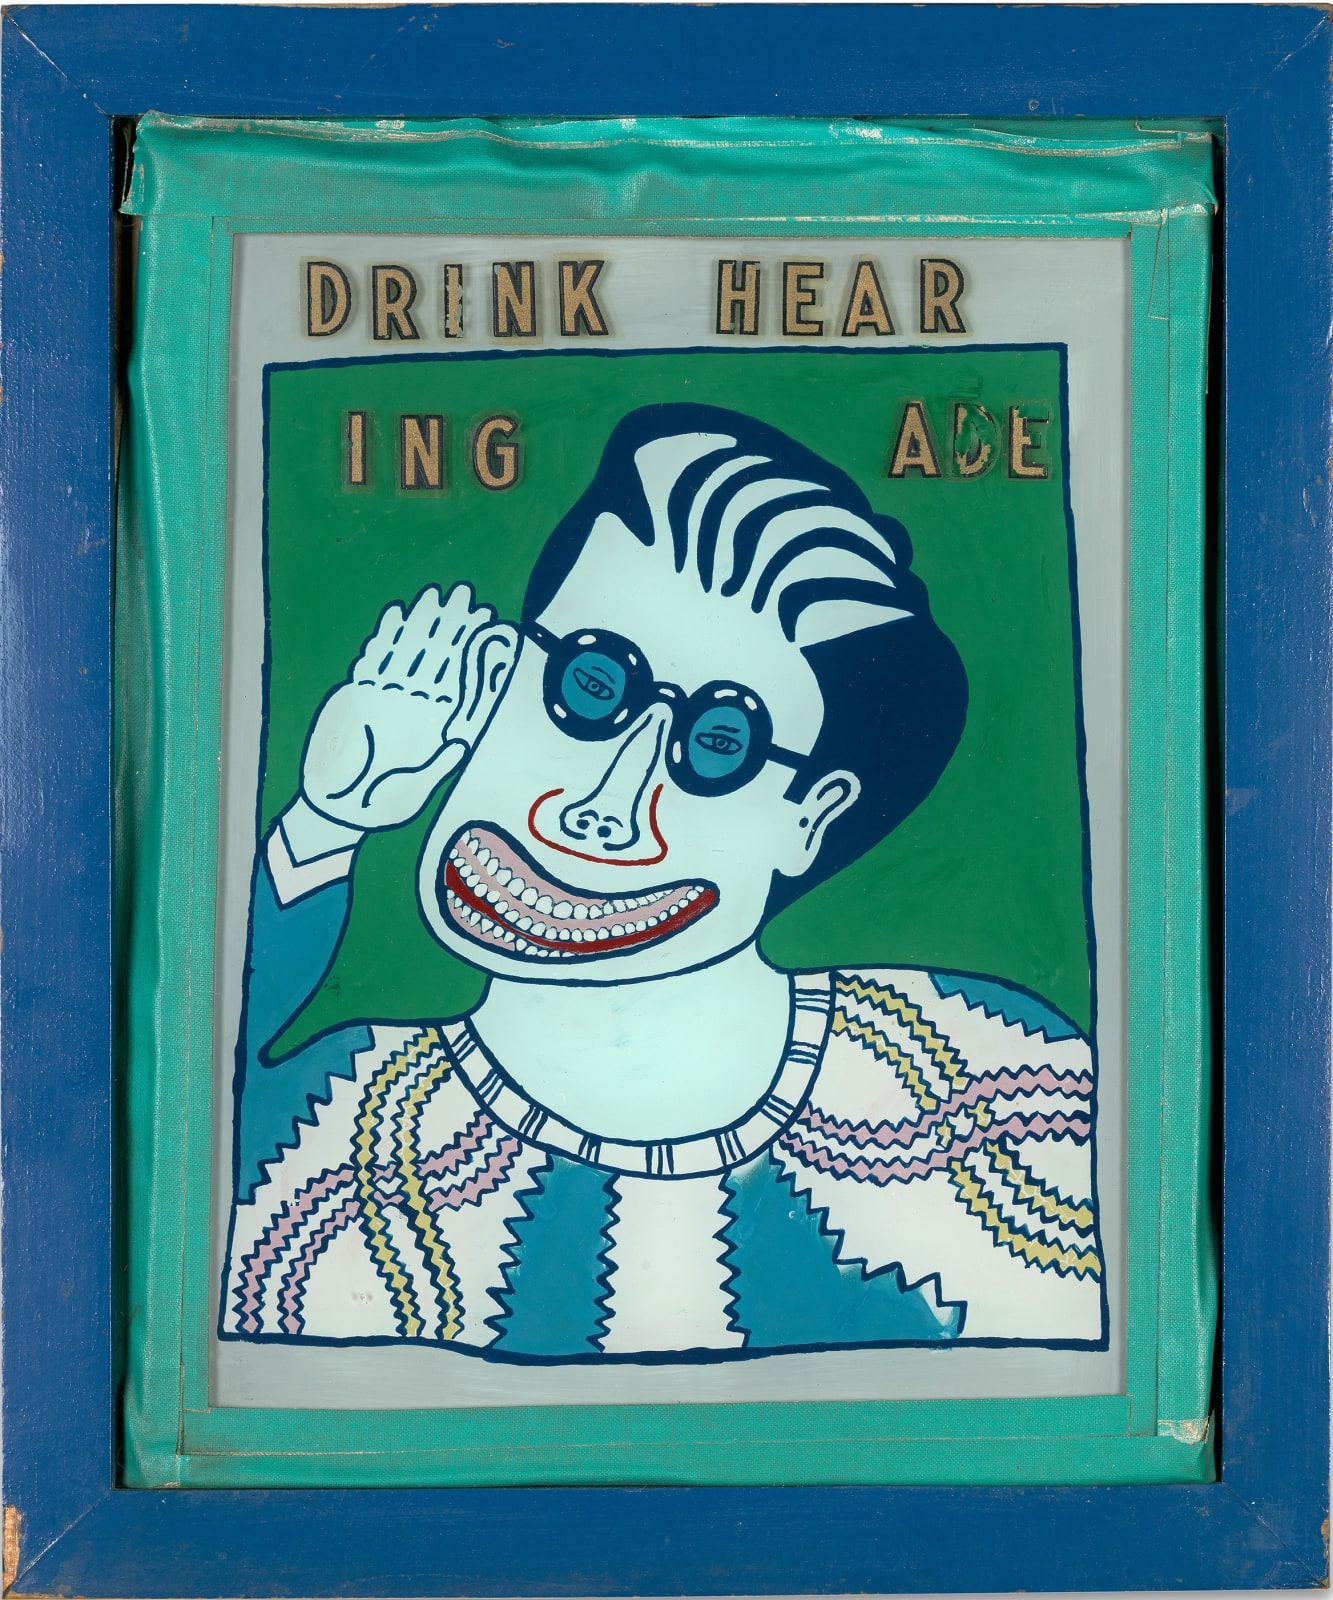 Drink Hear Ing Ade, 1966, acrylic on glass, decals, tape, and painted wood frame, 11 x 9 1/4 x 1 3/4 inches, private collection (photo by Jeremy Lawson, courtesy of the Frances Young Tang Teaching Museum and Art Gallery at Skidmore College)